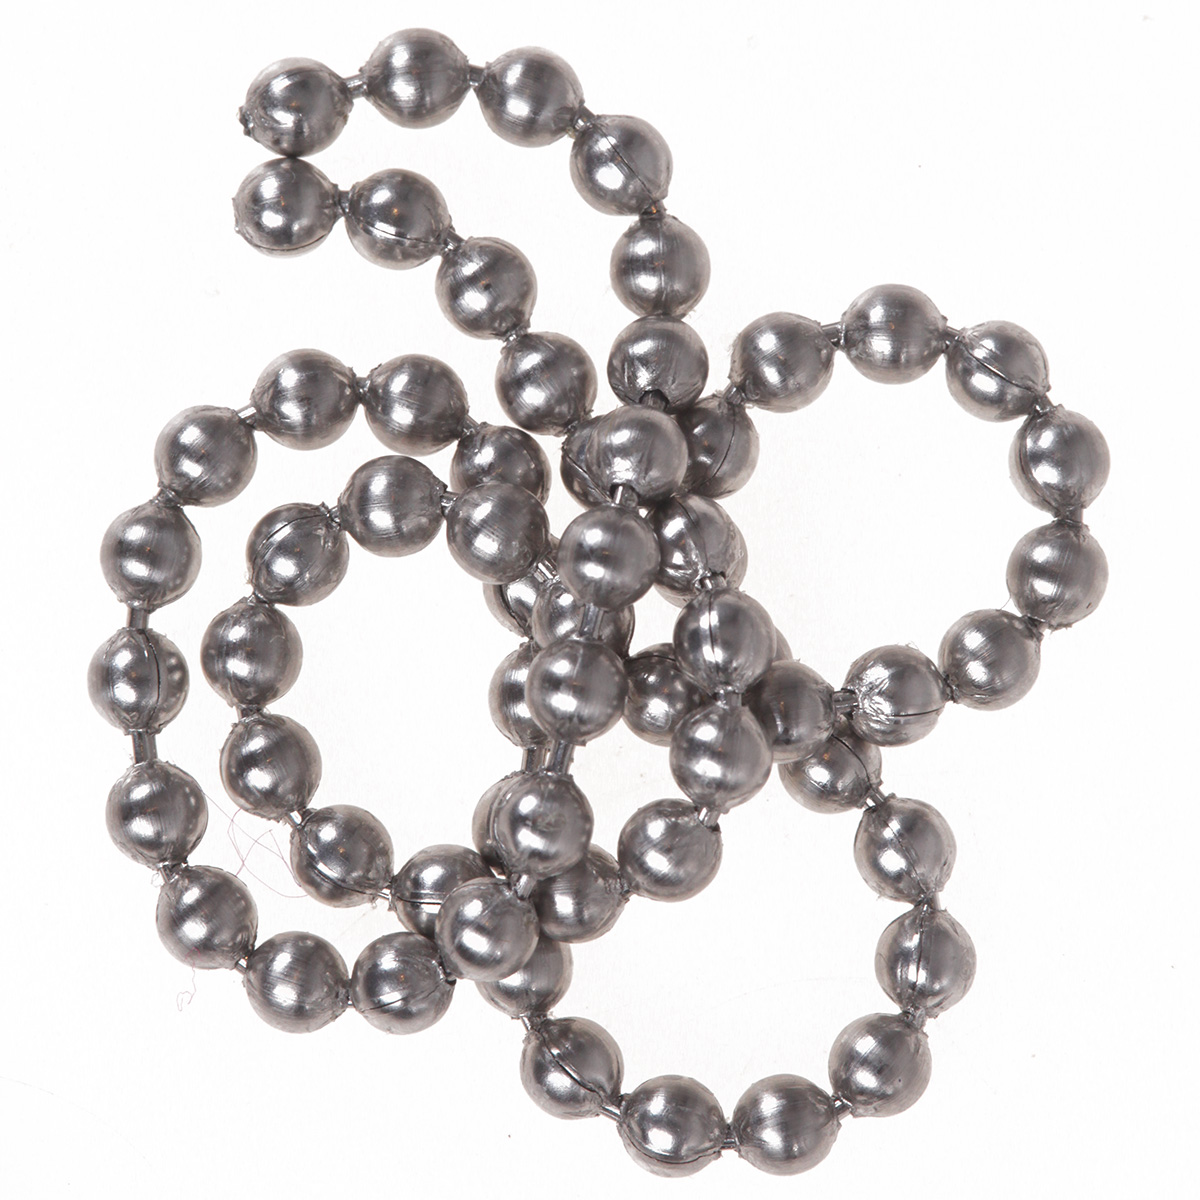 Hareline Stainless Steel Bead Chain Eyes